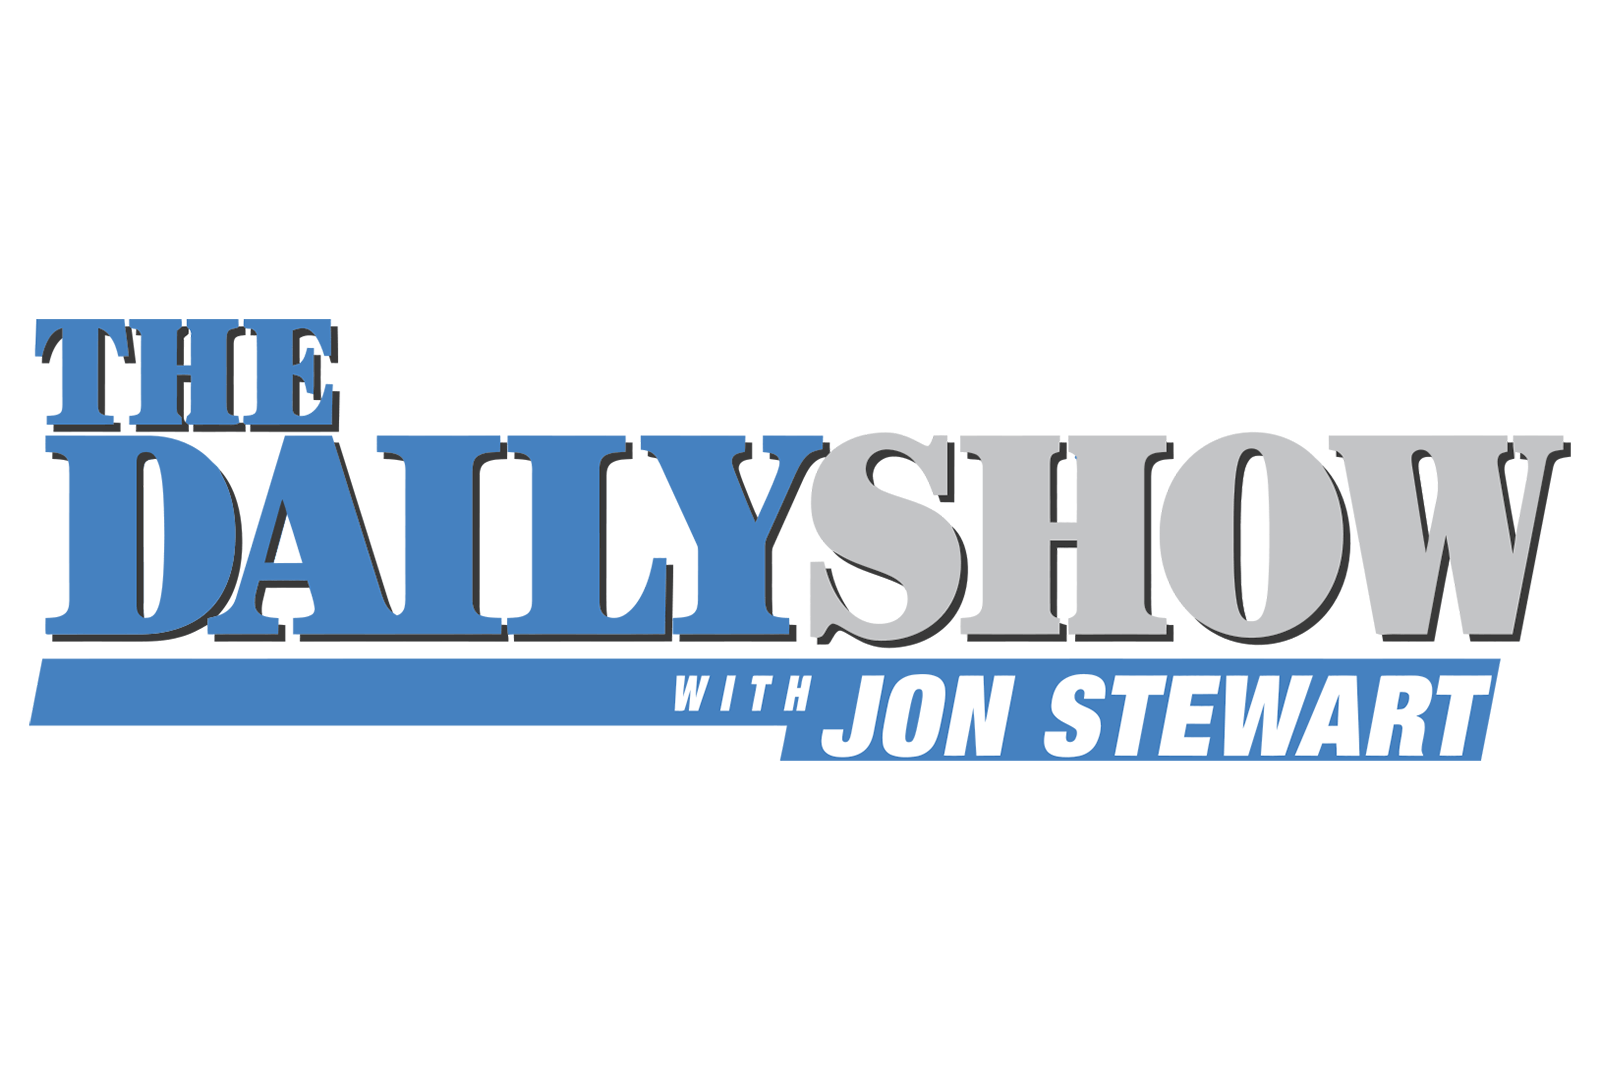 Stewart's Logo - The Peabody Awards - Institutional Award: The Daily Show with Jon ...